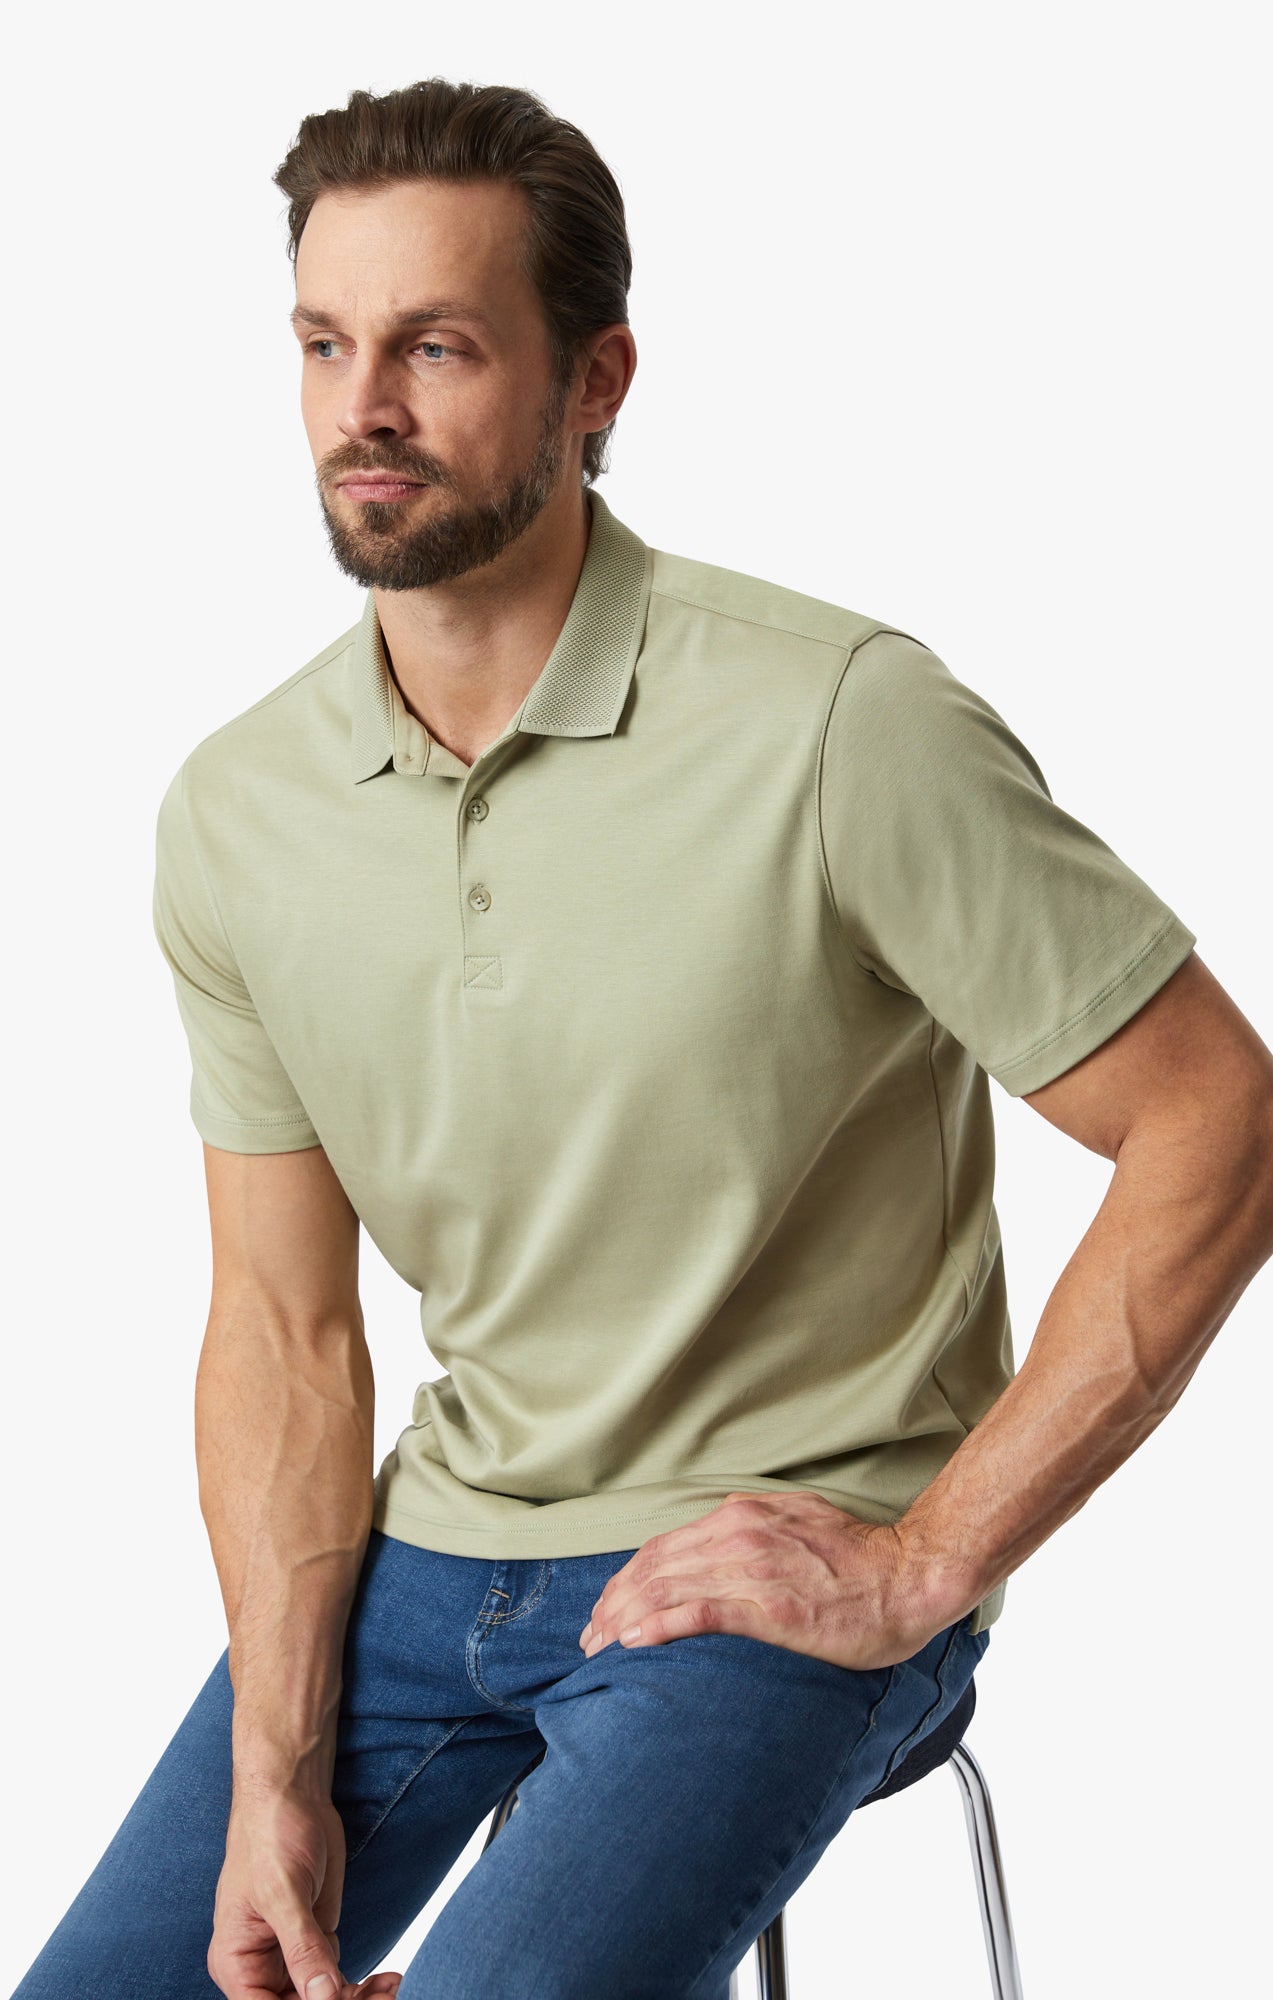 Polo T-Shirt In Sage